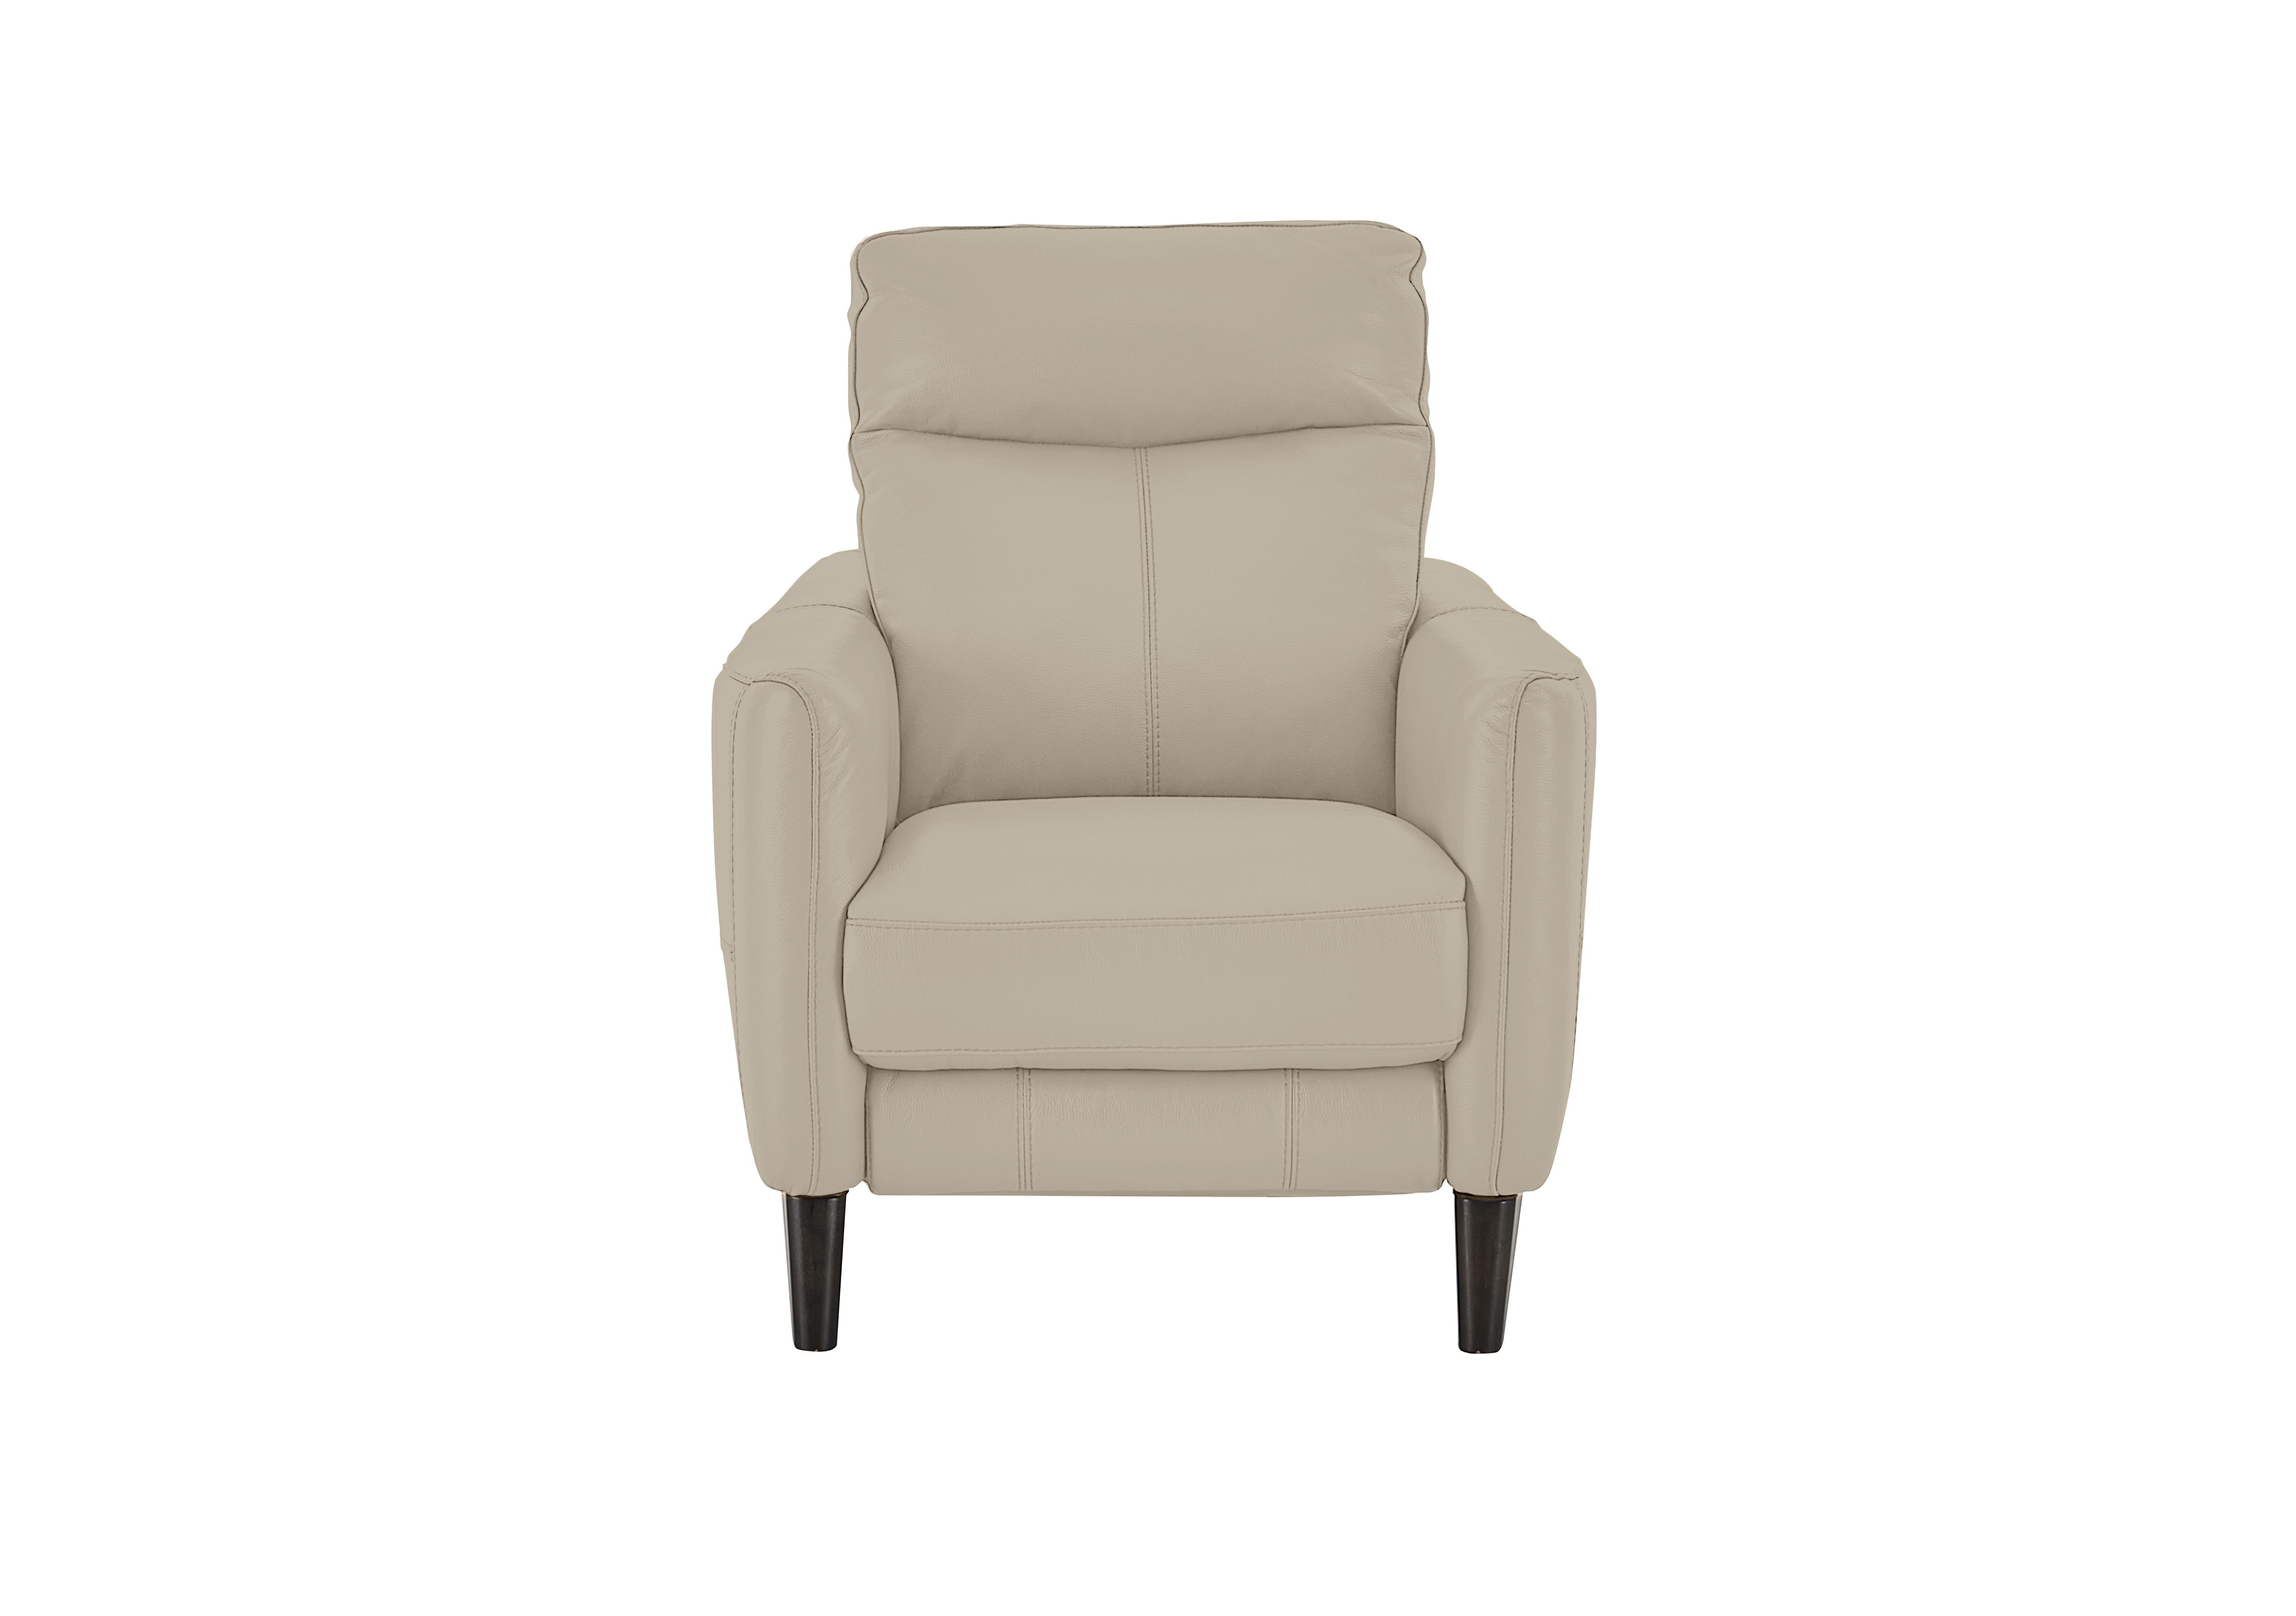 Compact Collection Petit Leather Recliner Armchair in Bv-041e Dapple Grey on Furniture Village